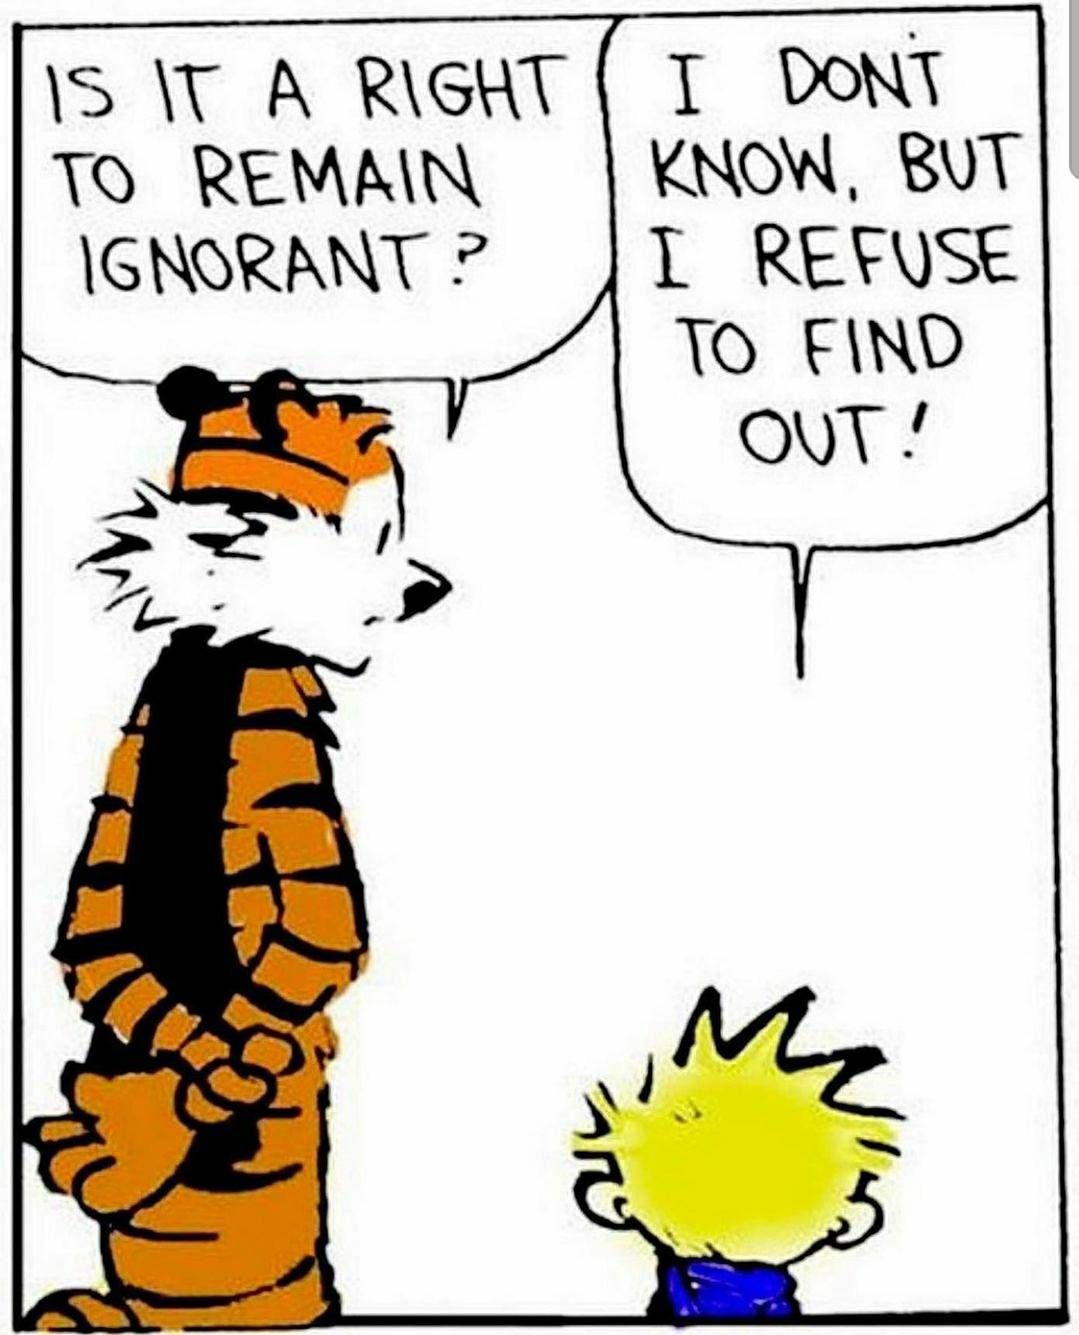 The Right to Remain Ignorant